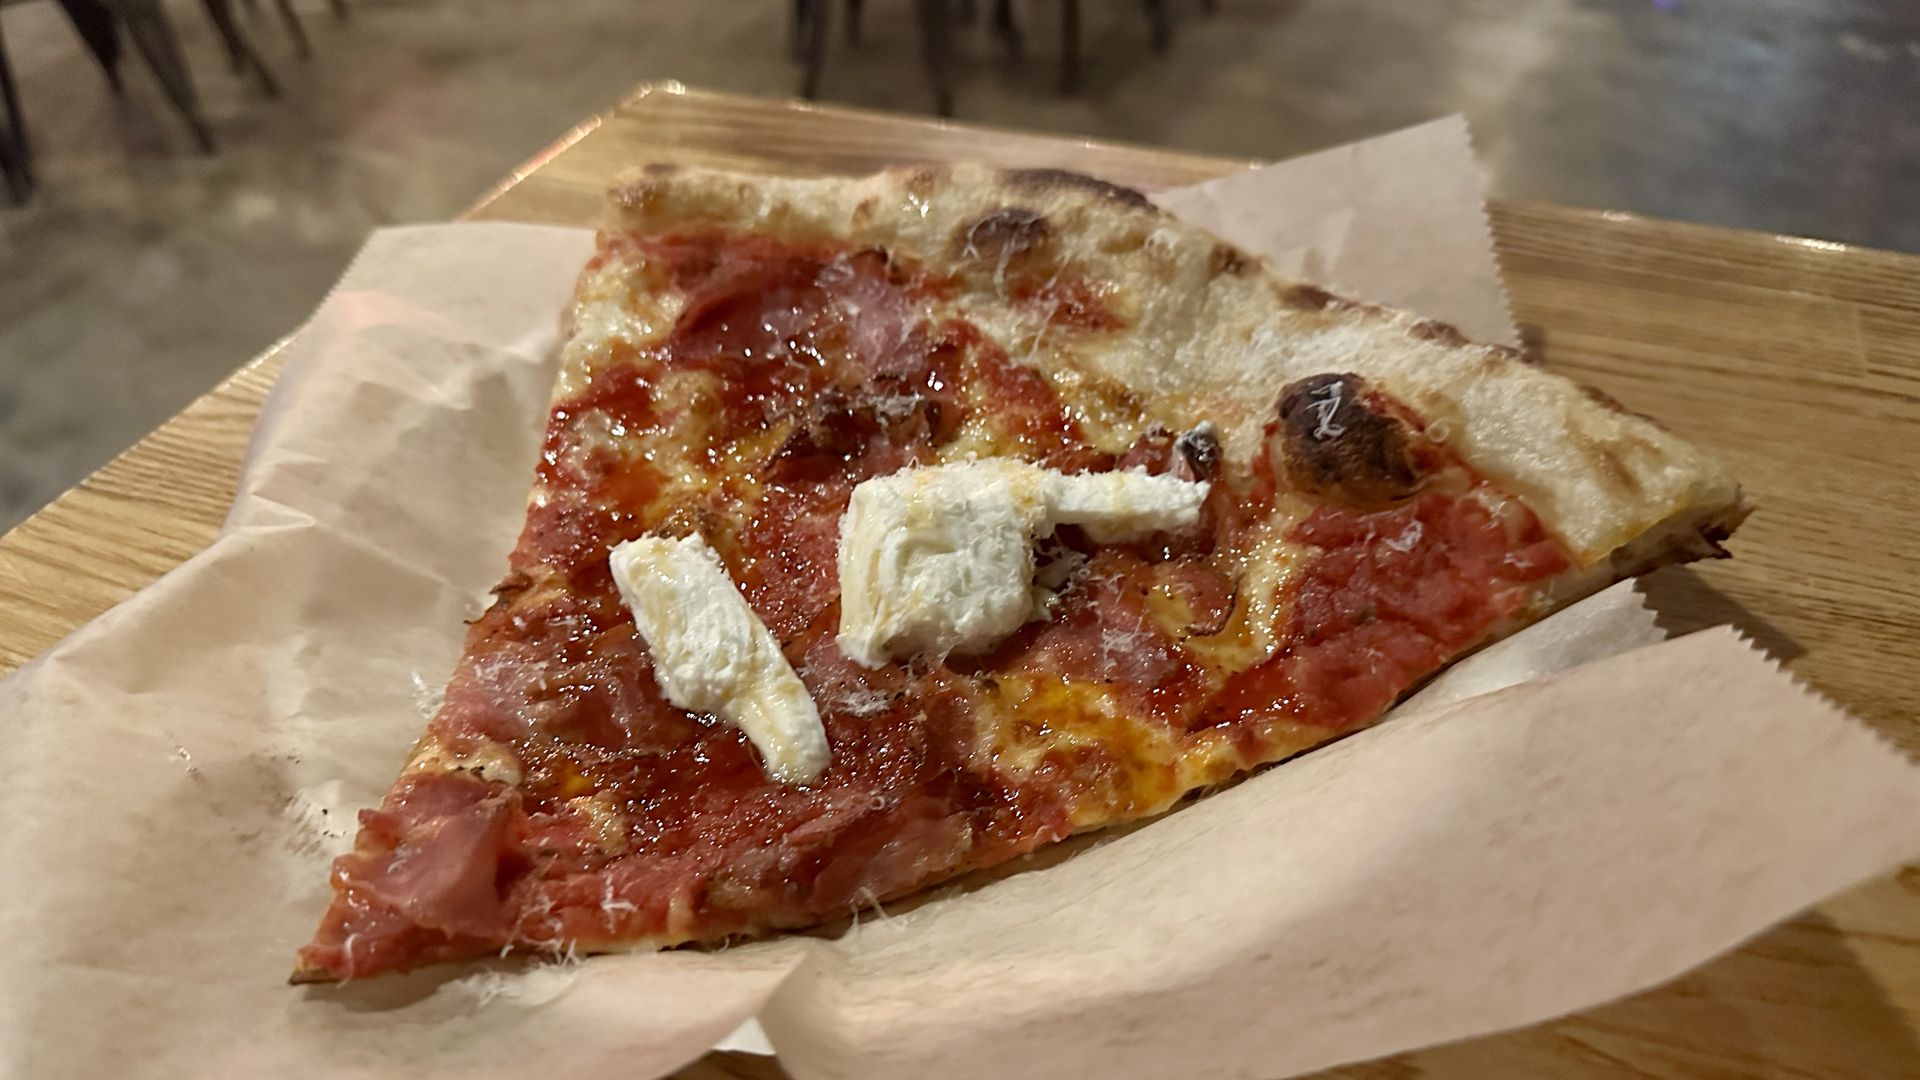 A slice of pizza with red sauce, coppa, burrata and hot honey from Stevie's Famous, sitting on a bar table.